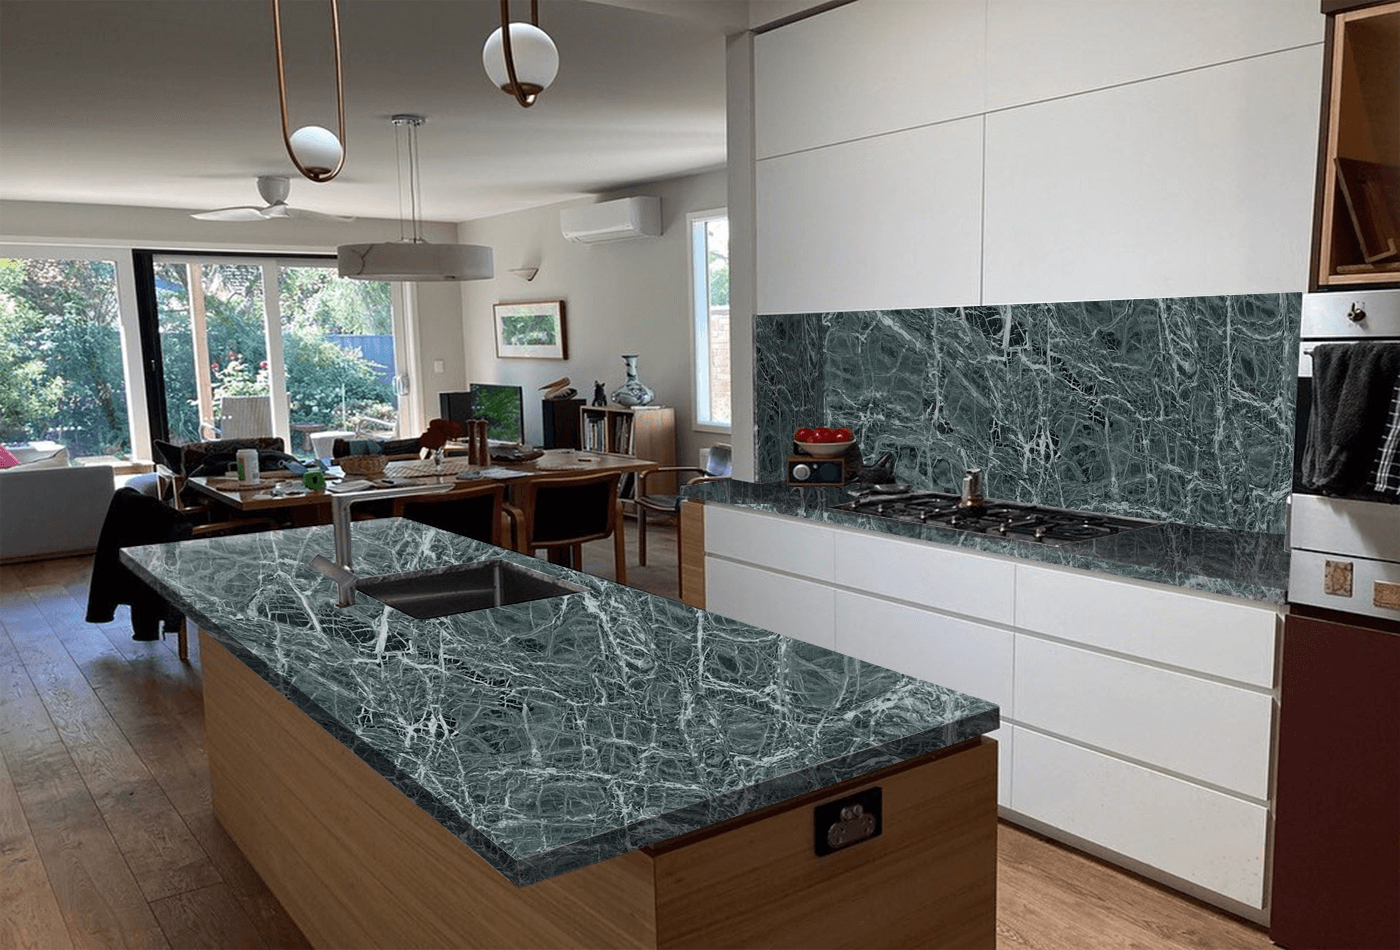 Spider Green Granite﻿; Bring Home the Veiny Web Texture